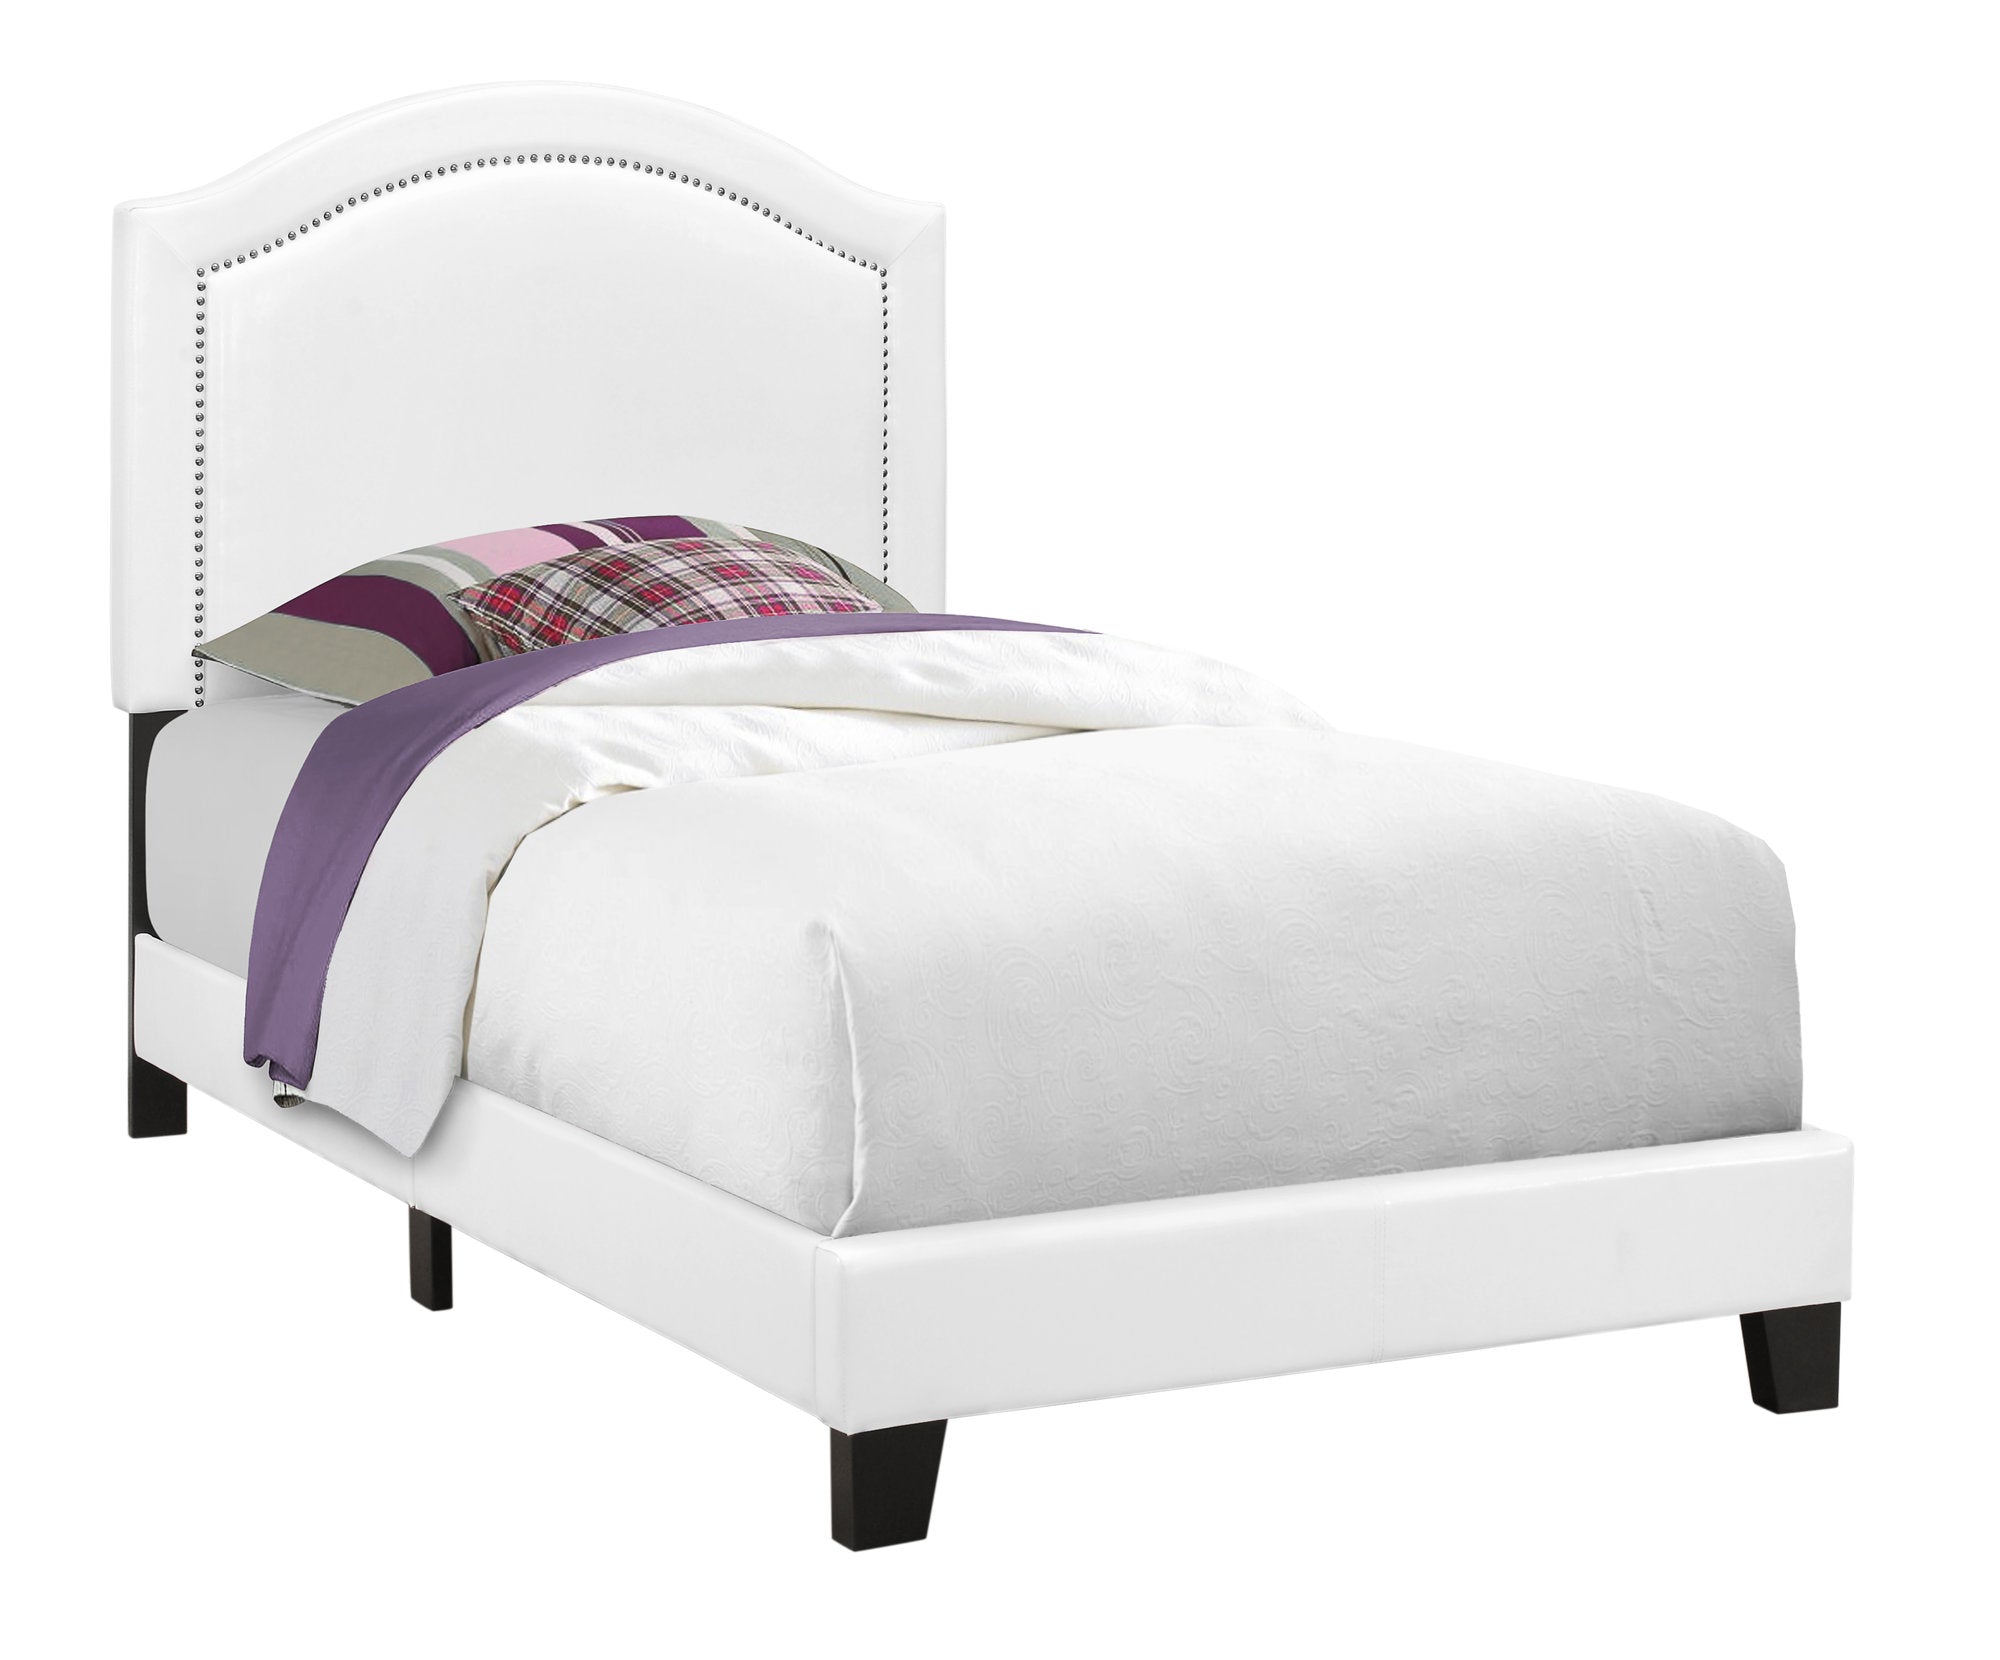 43" x 80.25" x 51.5" White, Leather Look With Chrome Trim - Twin Bed Size